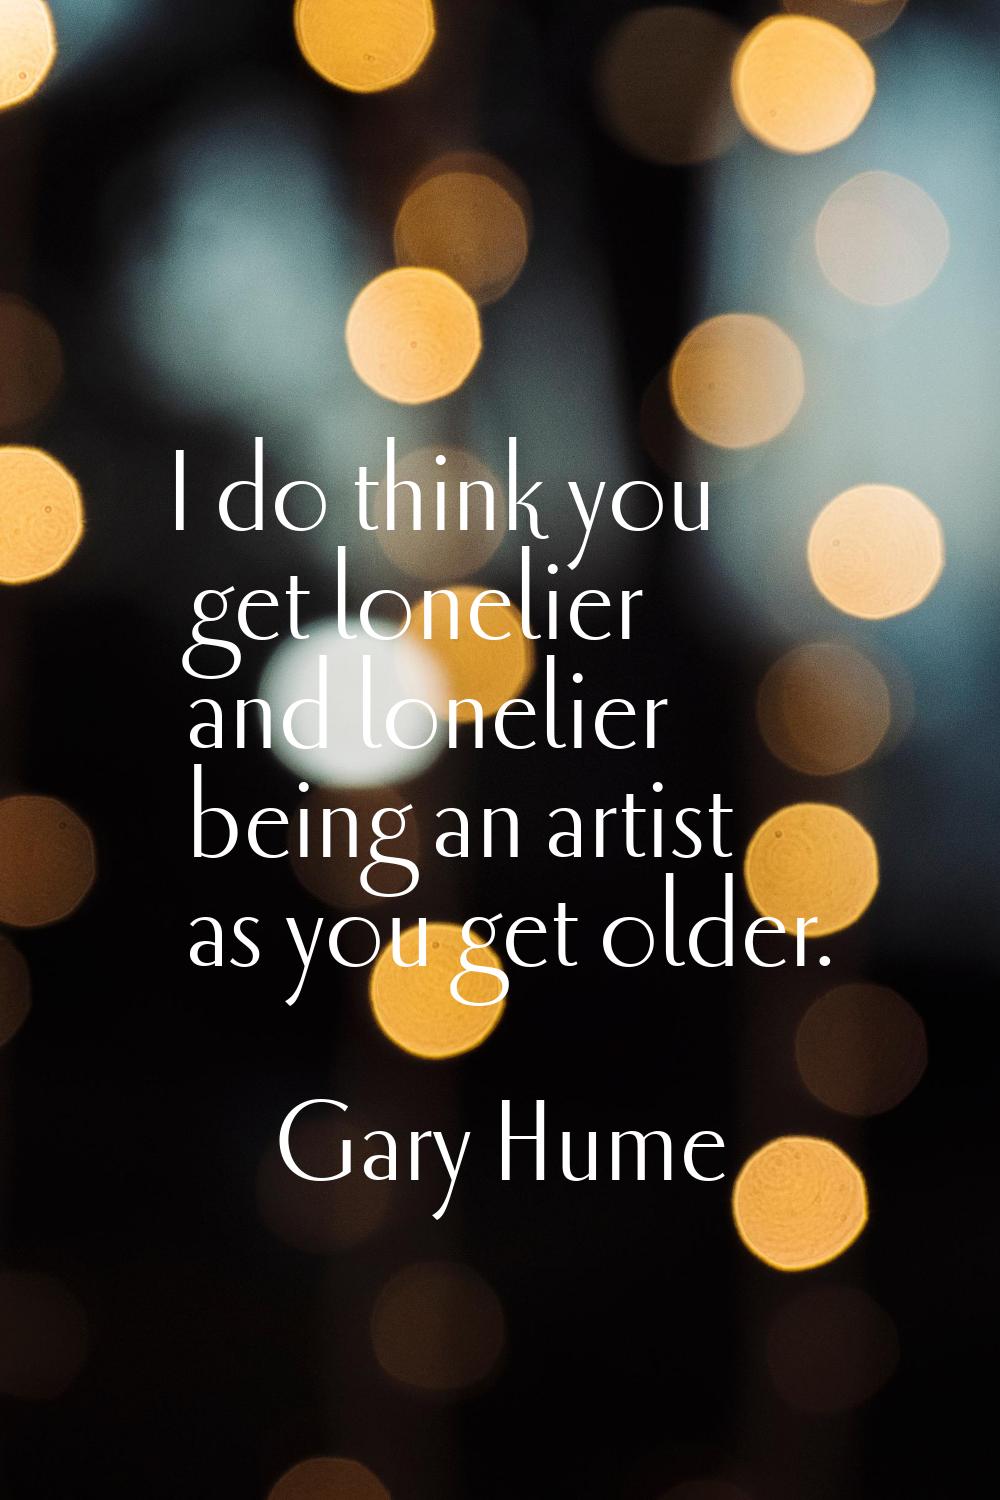 I do think you get lonelier and lonelier being an artist as you get older.